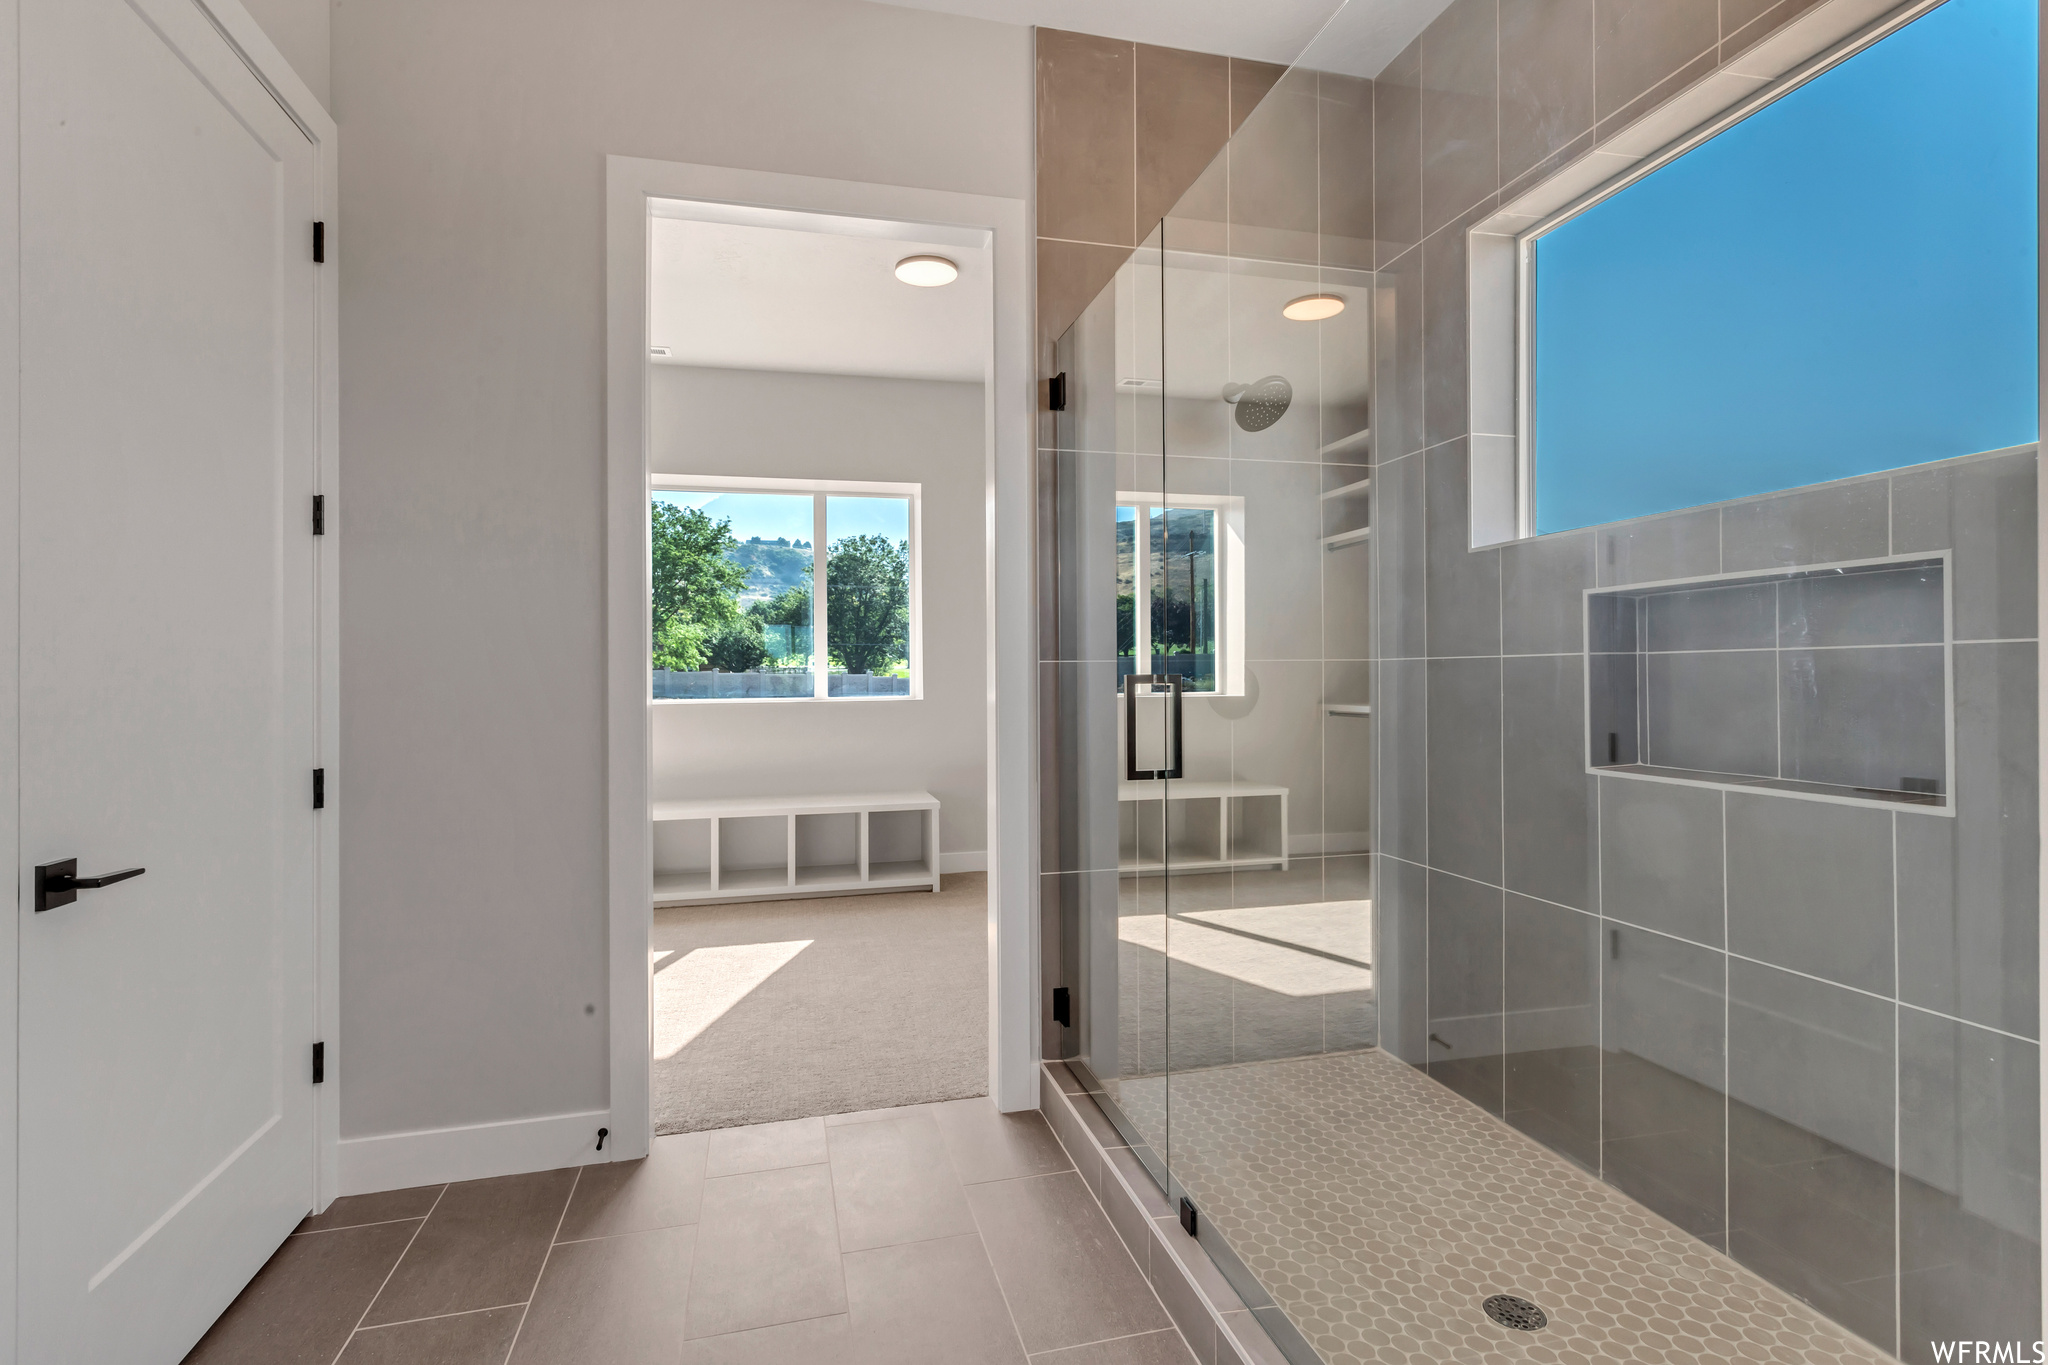 Glass doors enclose the shower area